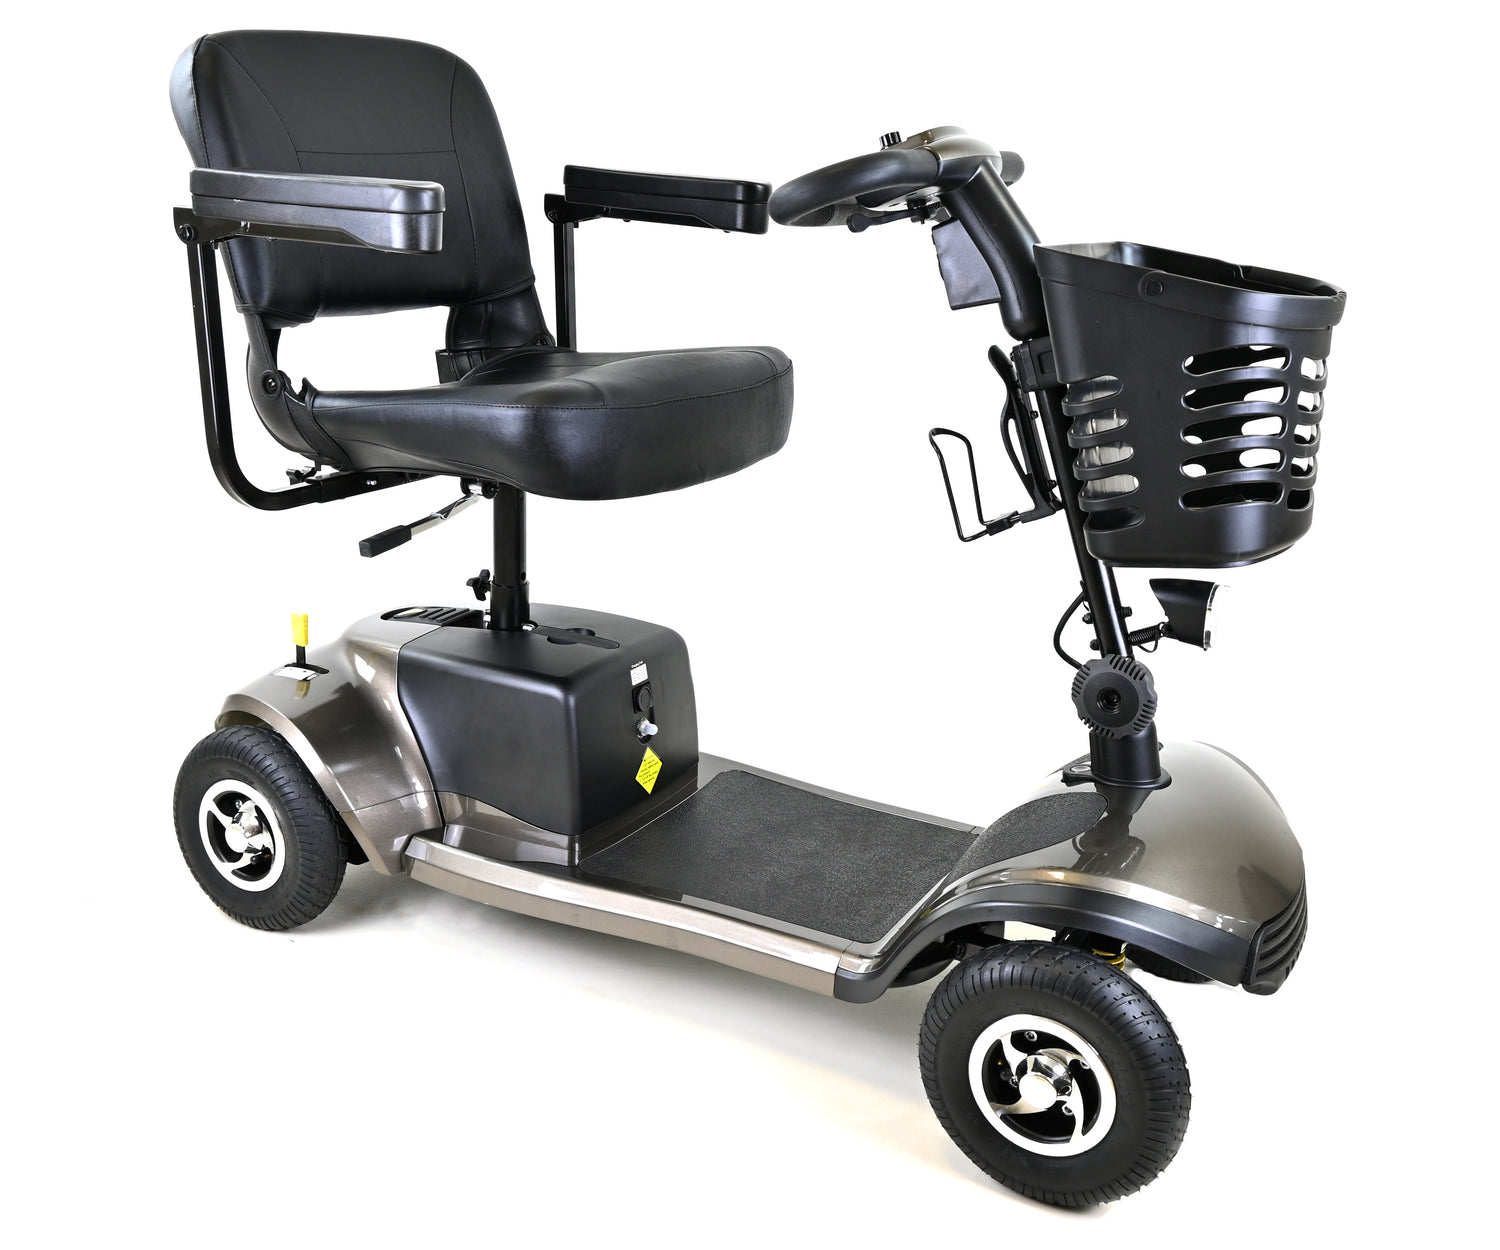 LITHIUM VANTAGE MOBILITY SCOOTER